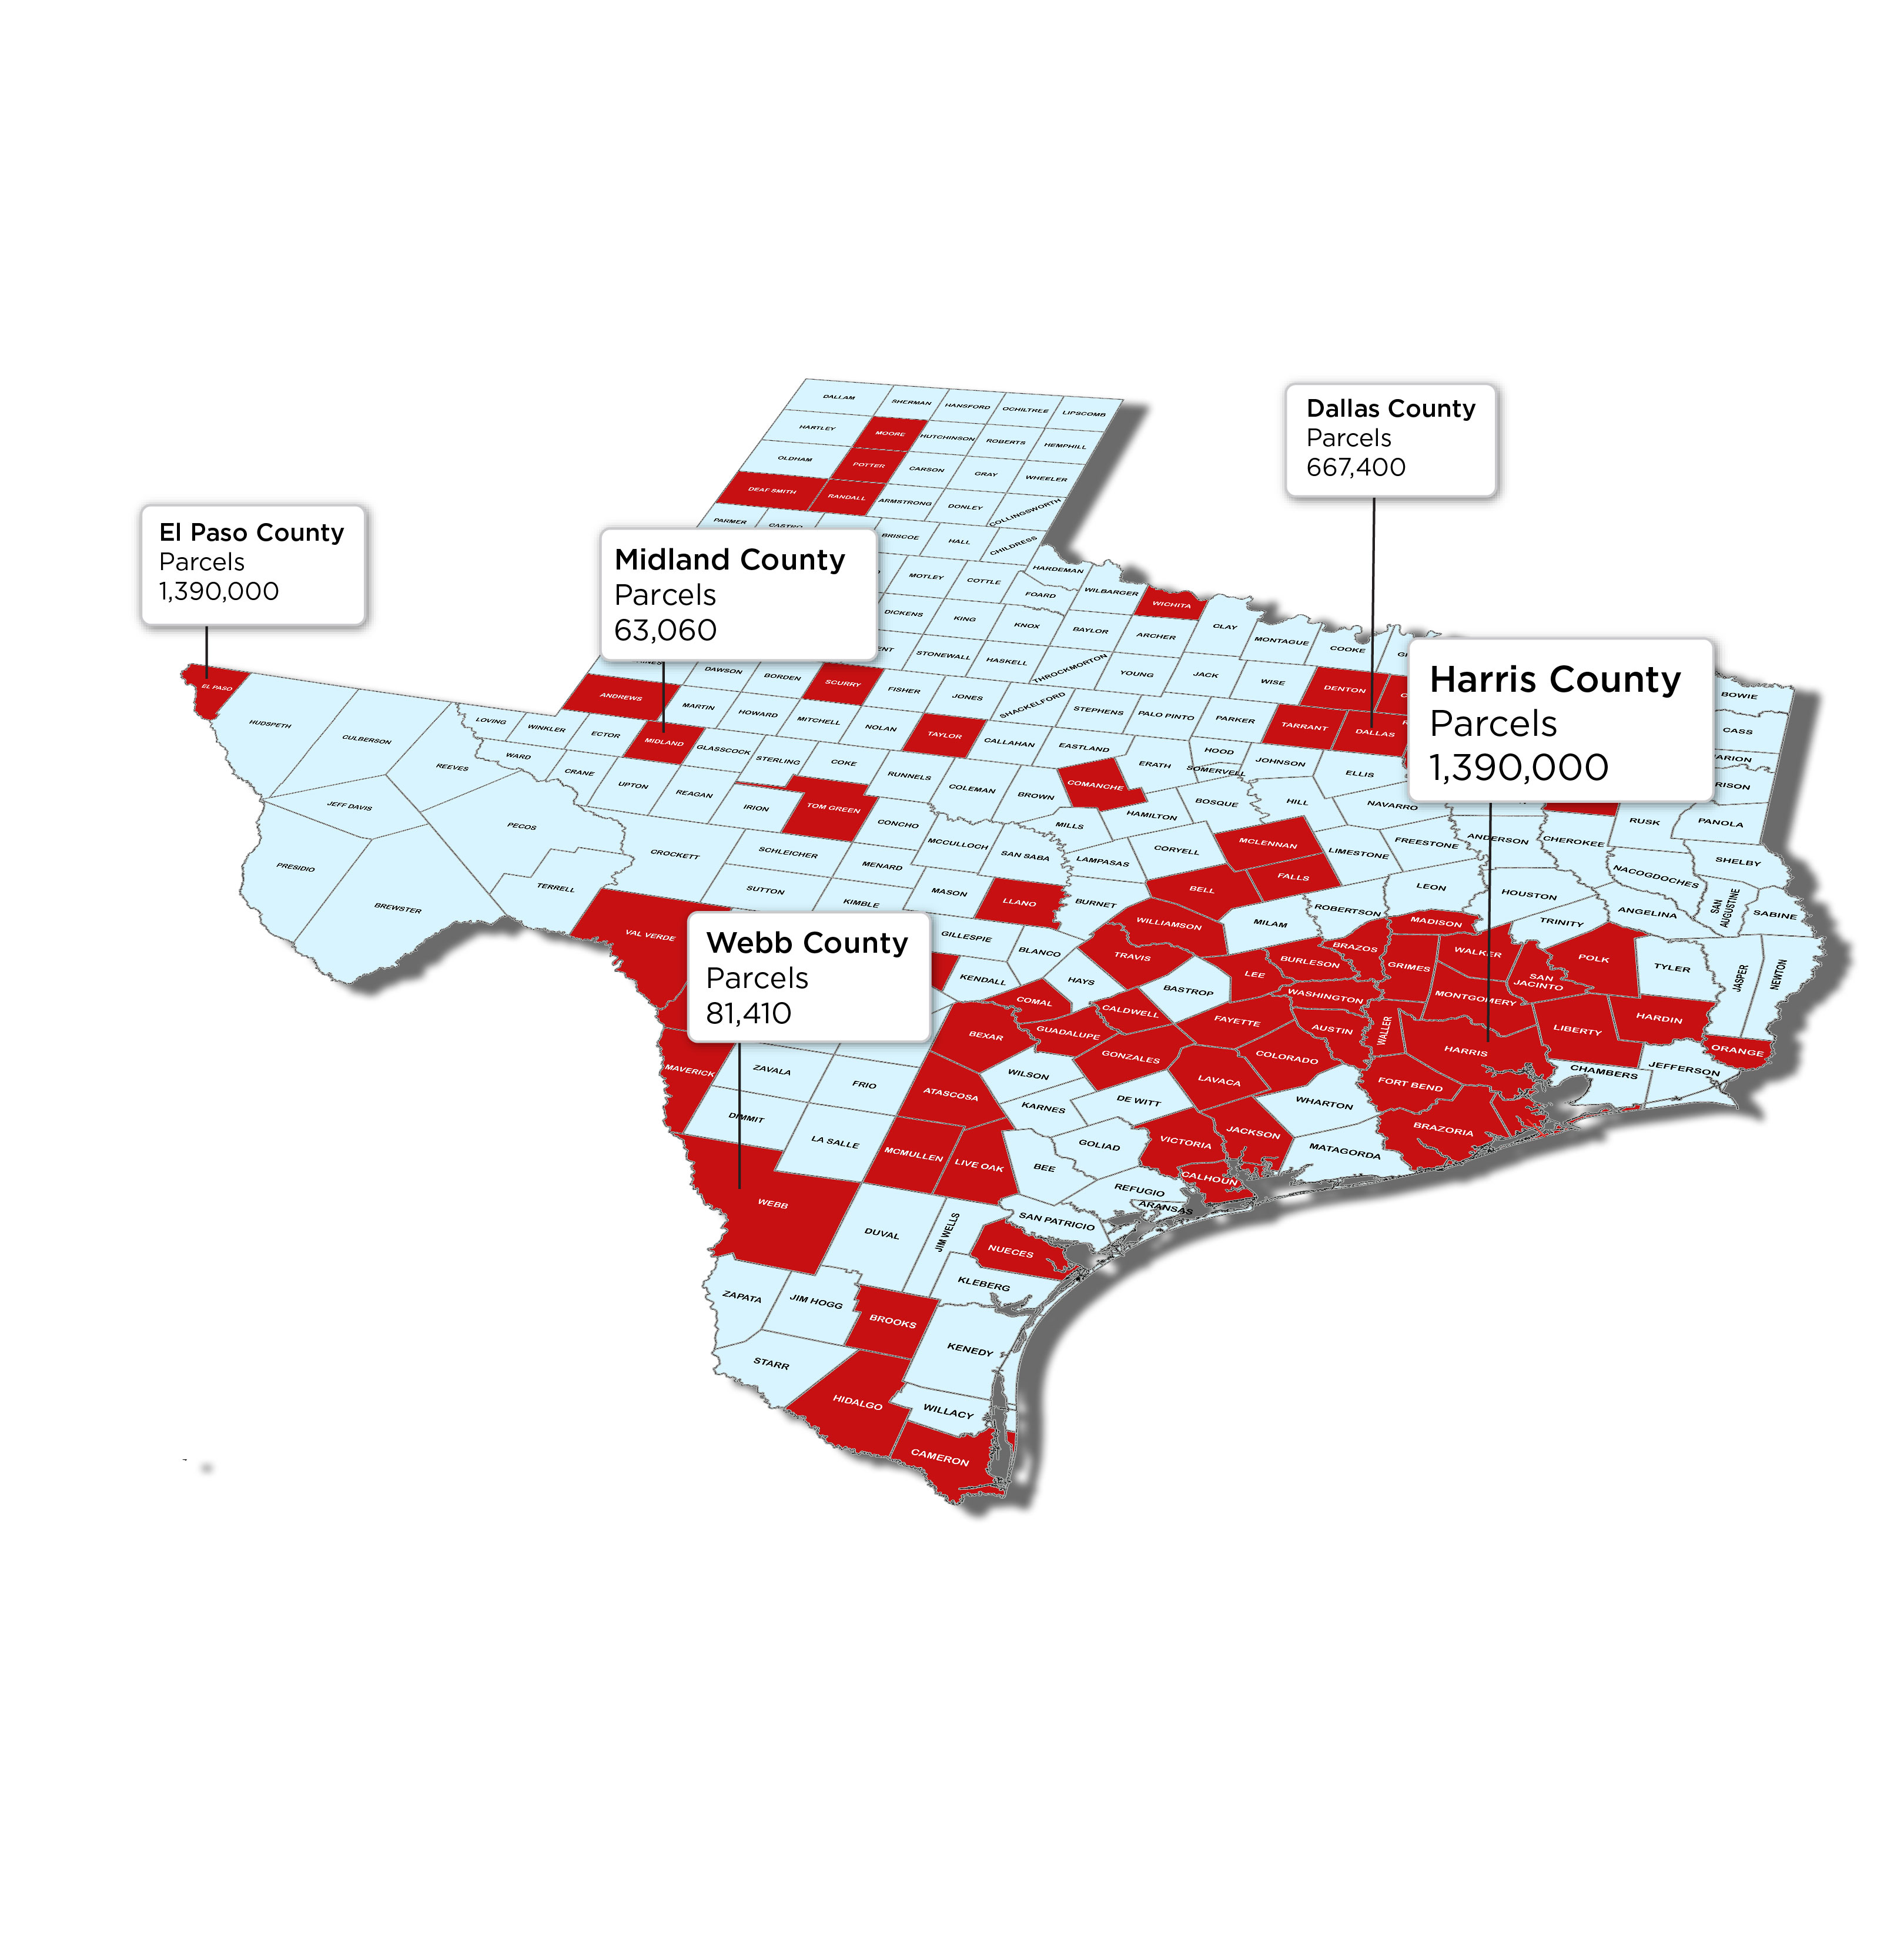 Texas Counties with Parcels